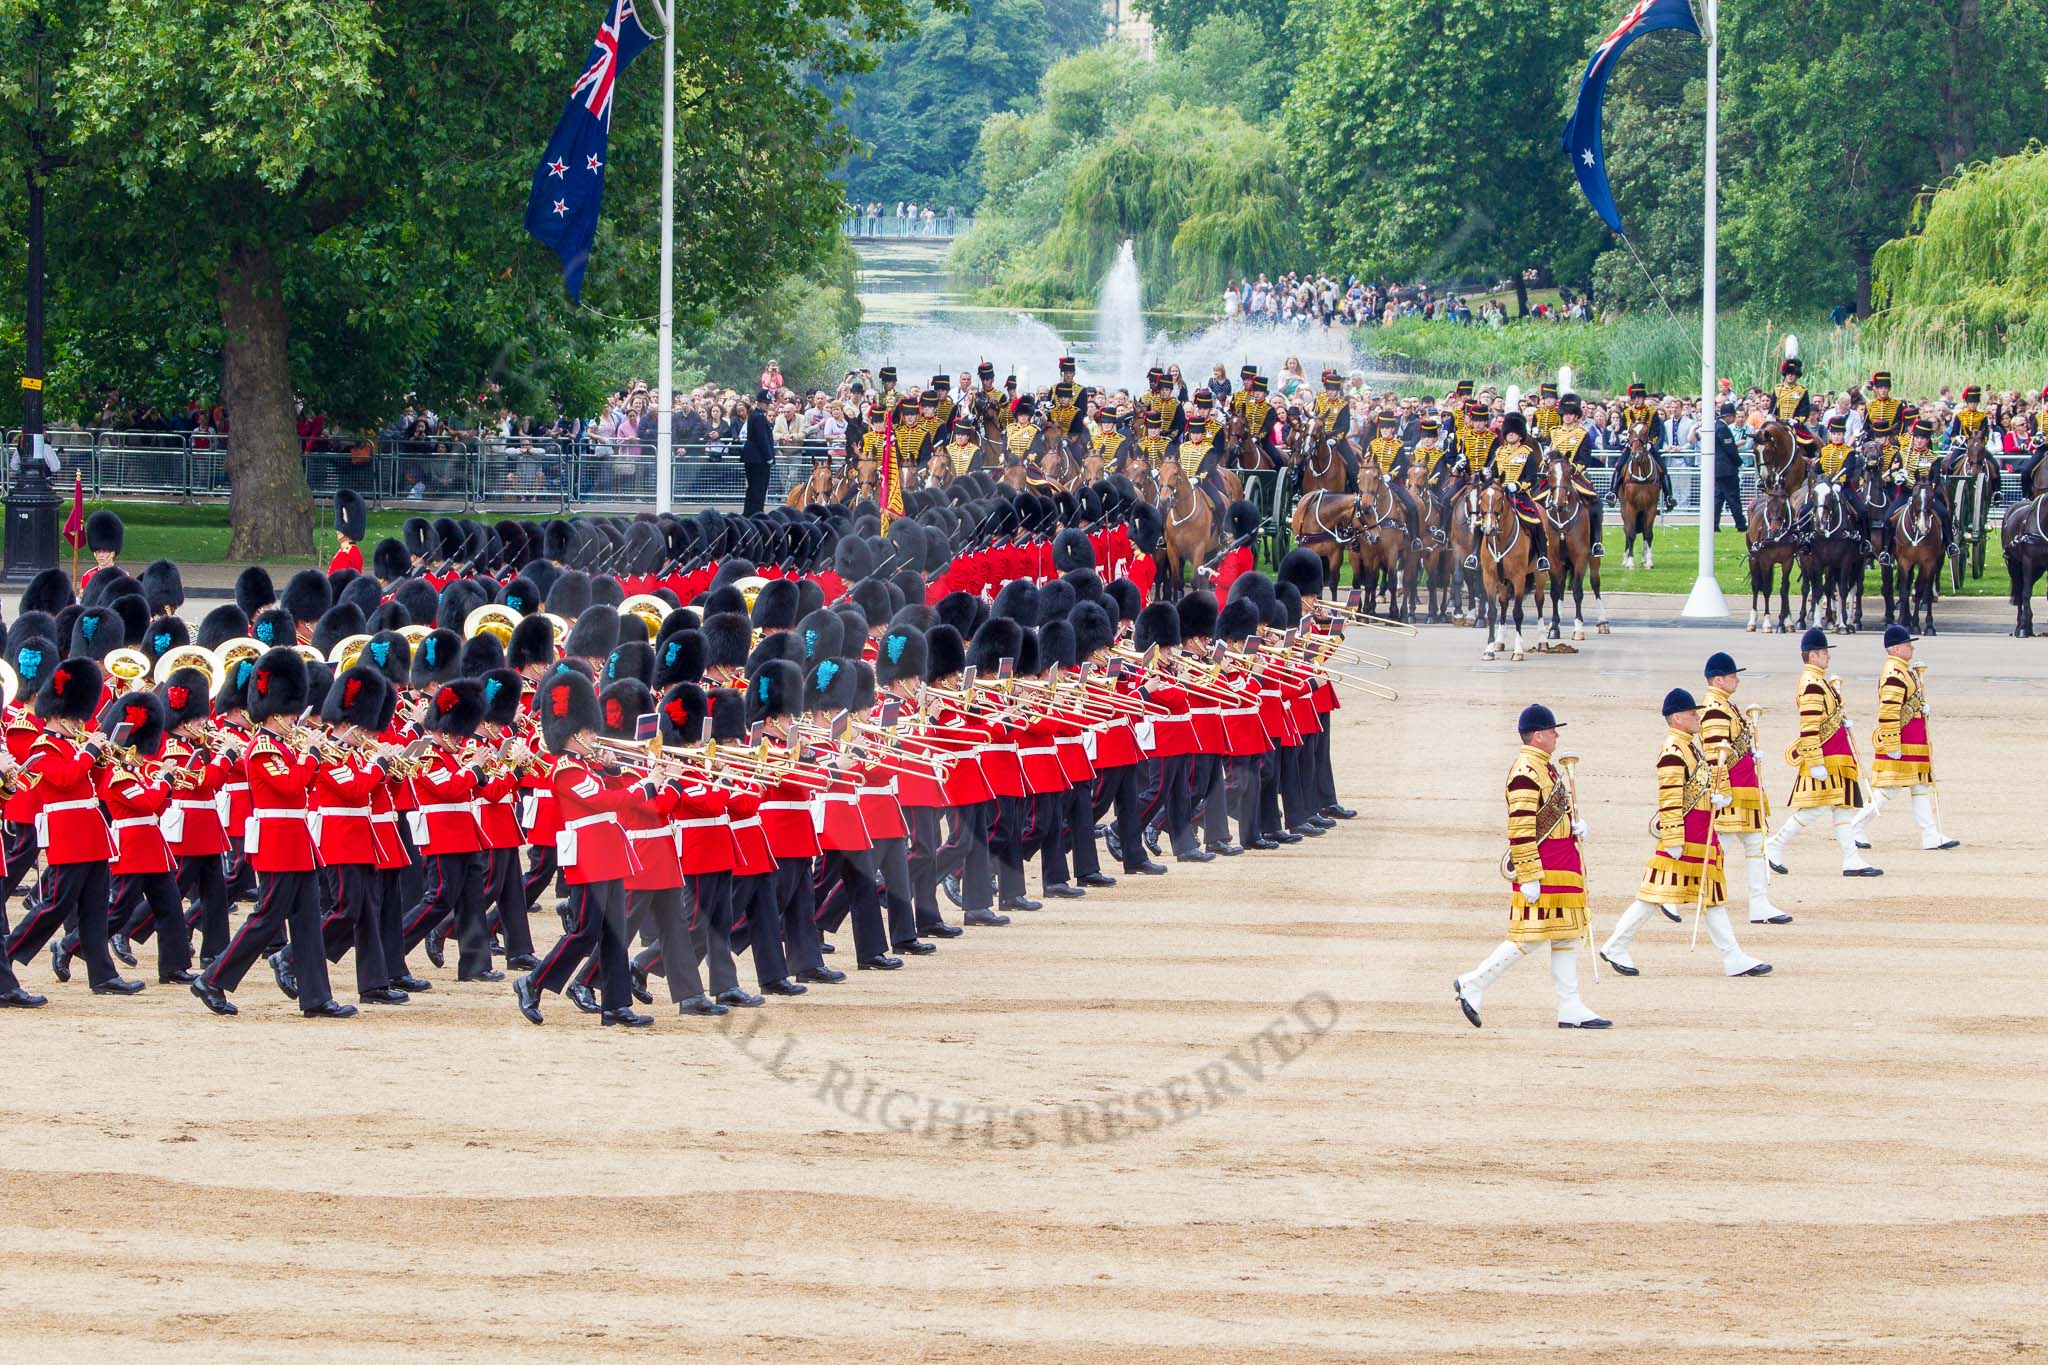 Trooping the Colour 2014.
Horse Guards Parade, Westminster,
London SW1A,

United Kingdom,
on 14 June 2014 at 11:33, image #587